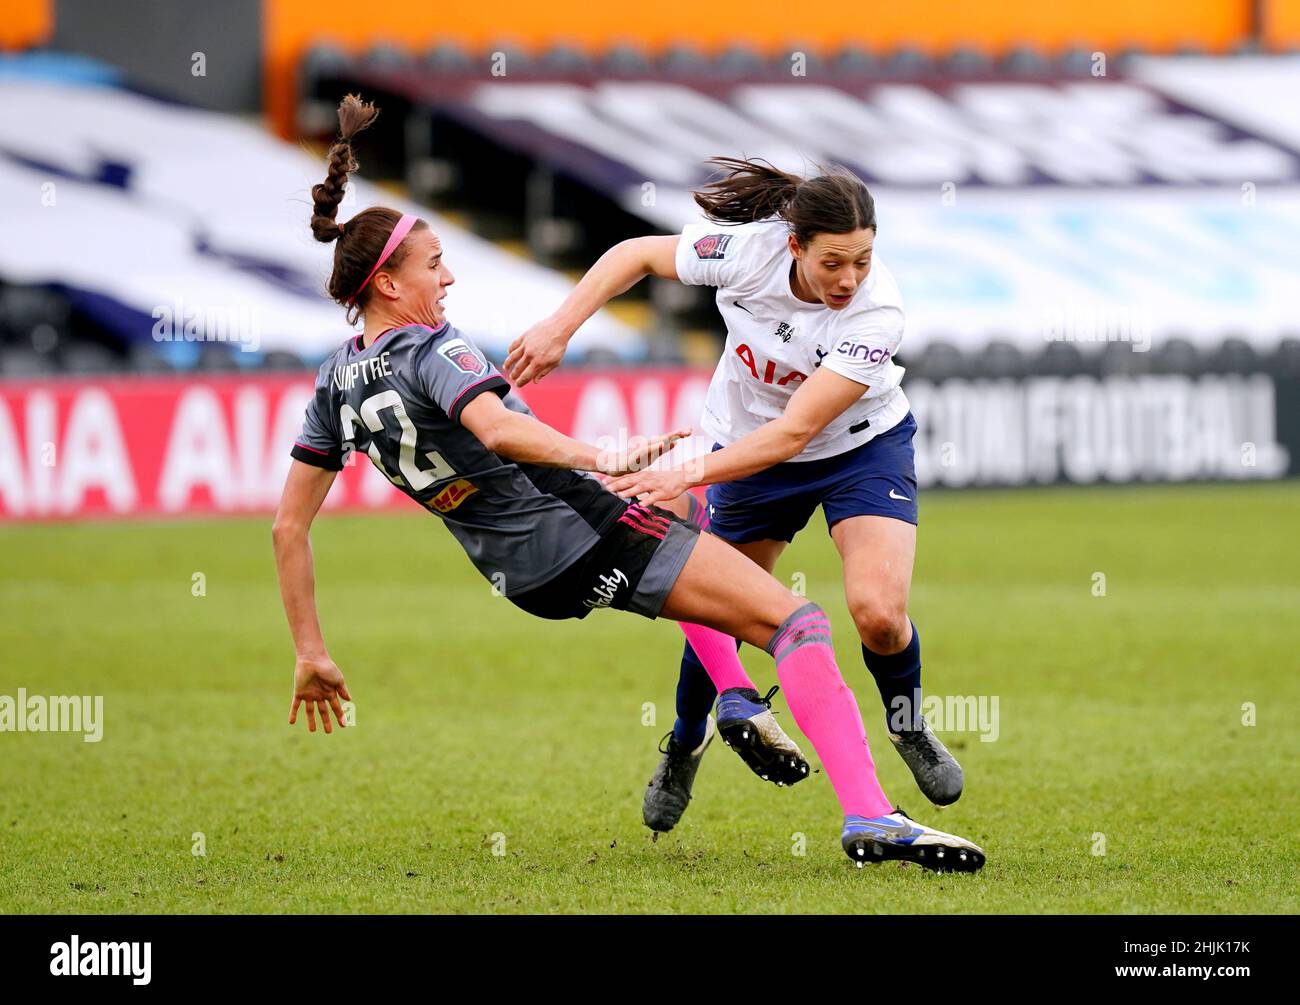 Leicester City's Ashleigh Plumptre (left) goes down after a challenge from Tottenham Hotspur's Rachel Williams during the Vitality Women's FA Cup fourth round match at The Hive, London. Picture date: Sunday January 30, 2022. Stock Photo